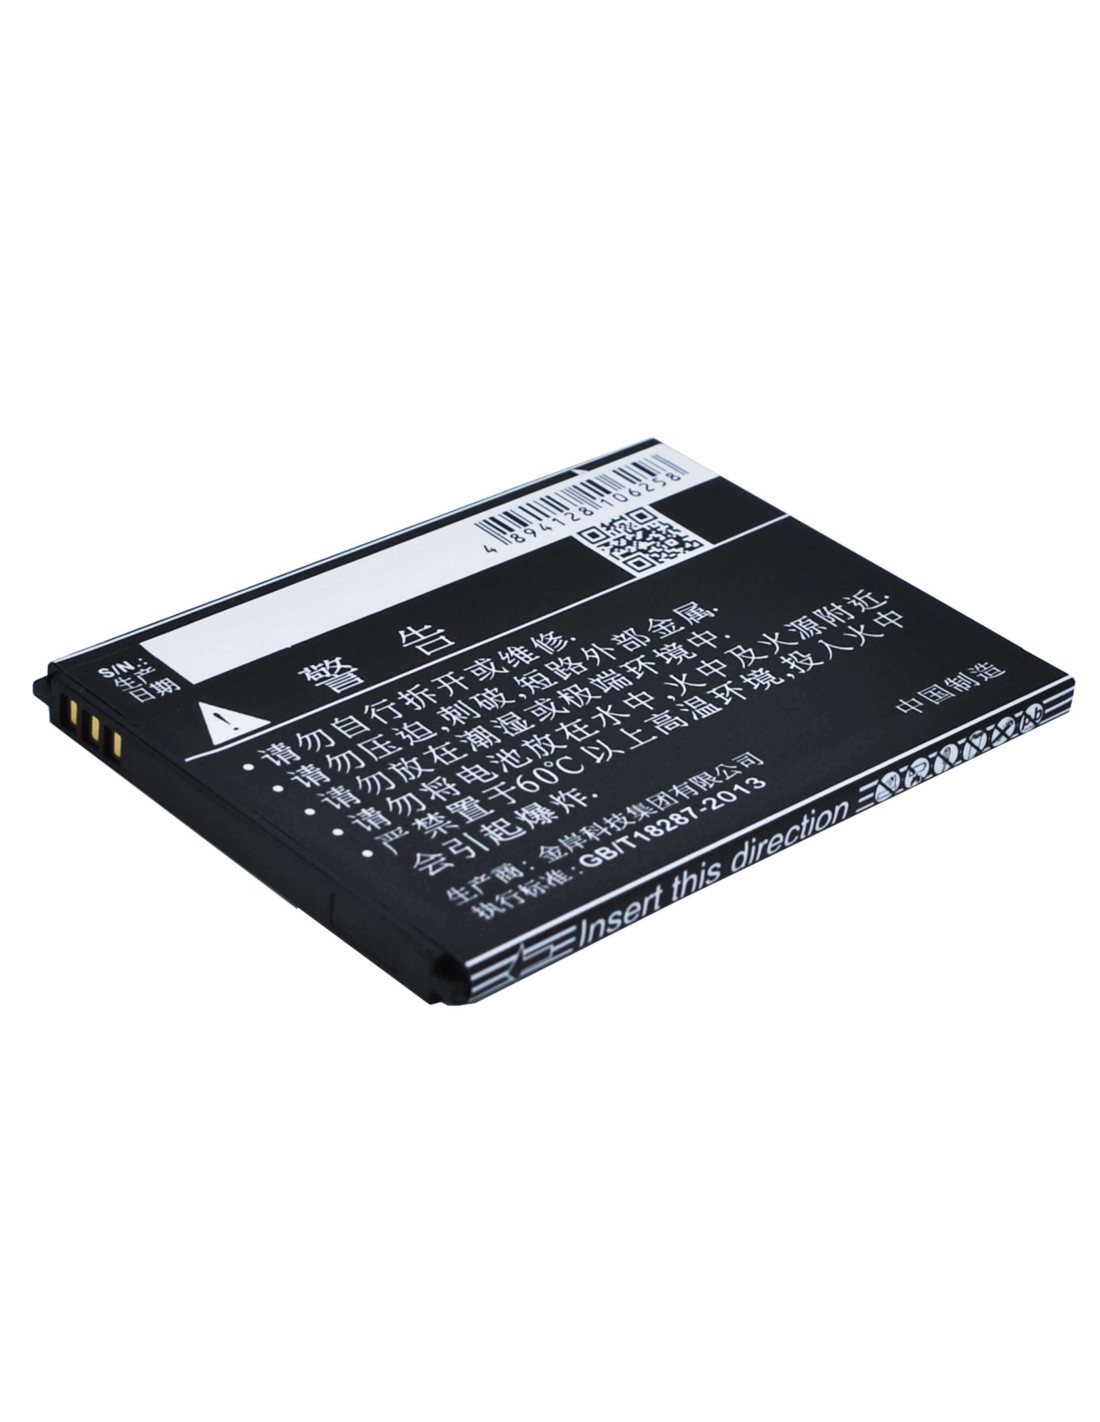 Battery for Coolpad 5263, 5360 3.7V, 1450mAh - 5.37Wh